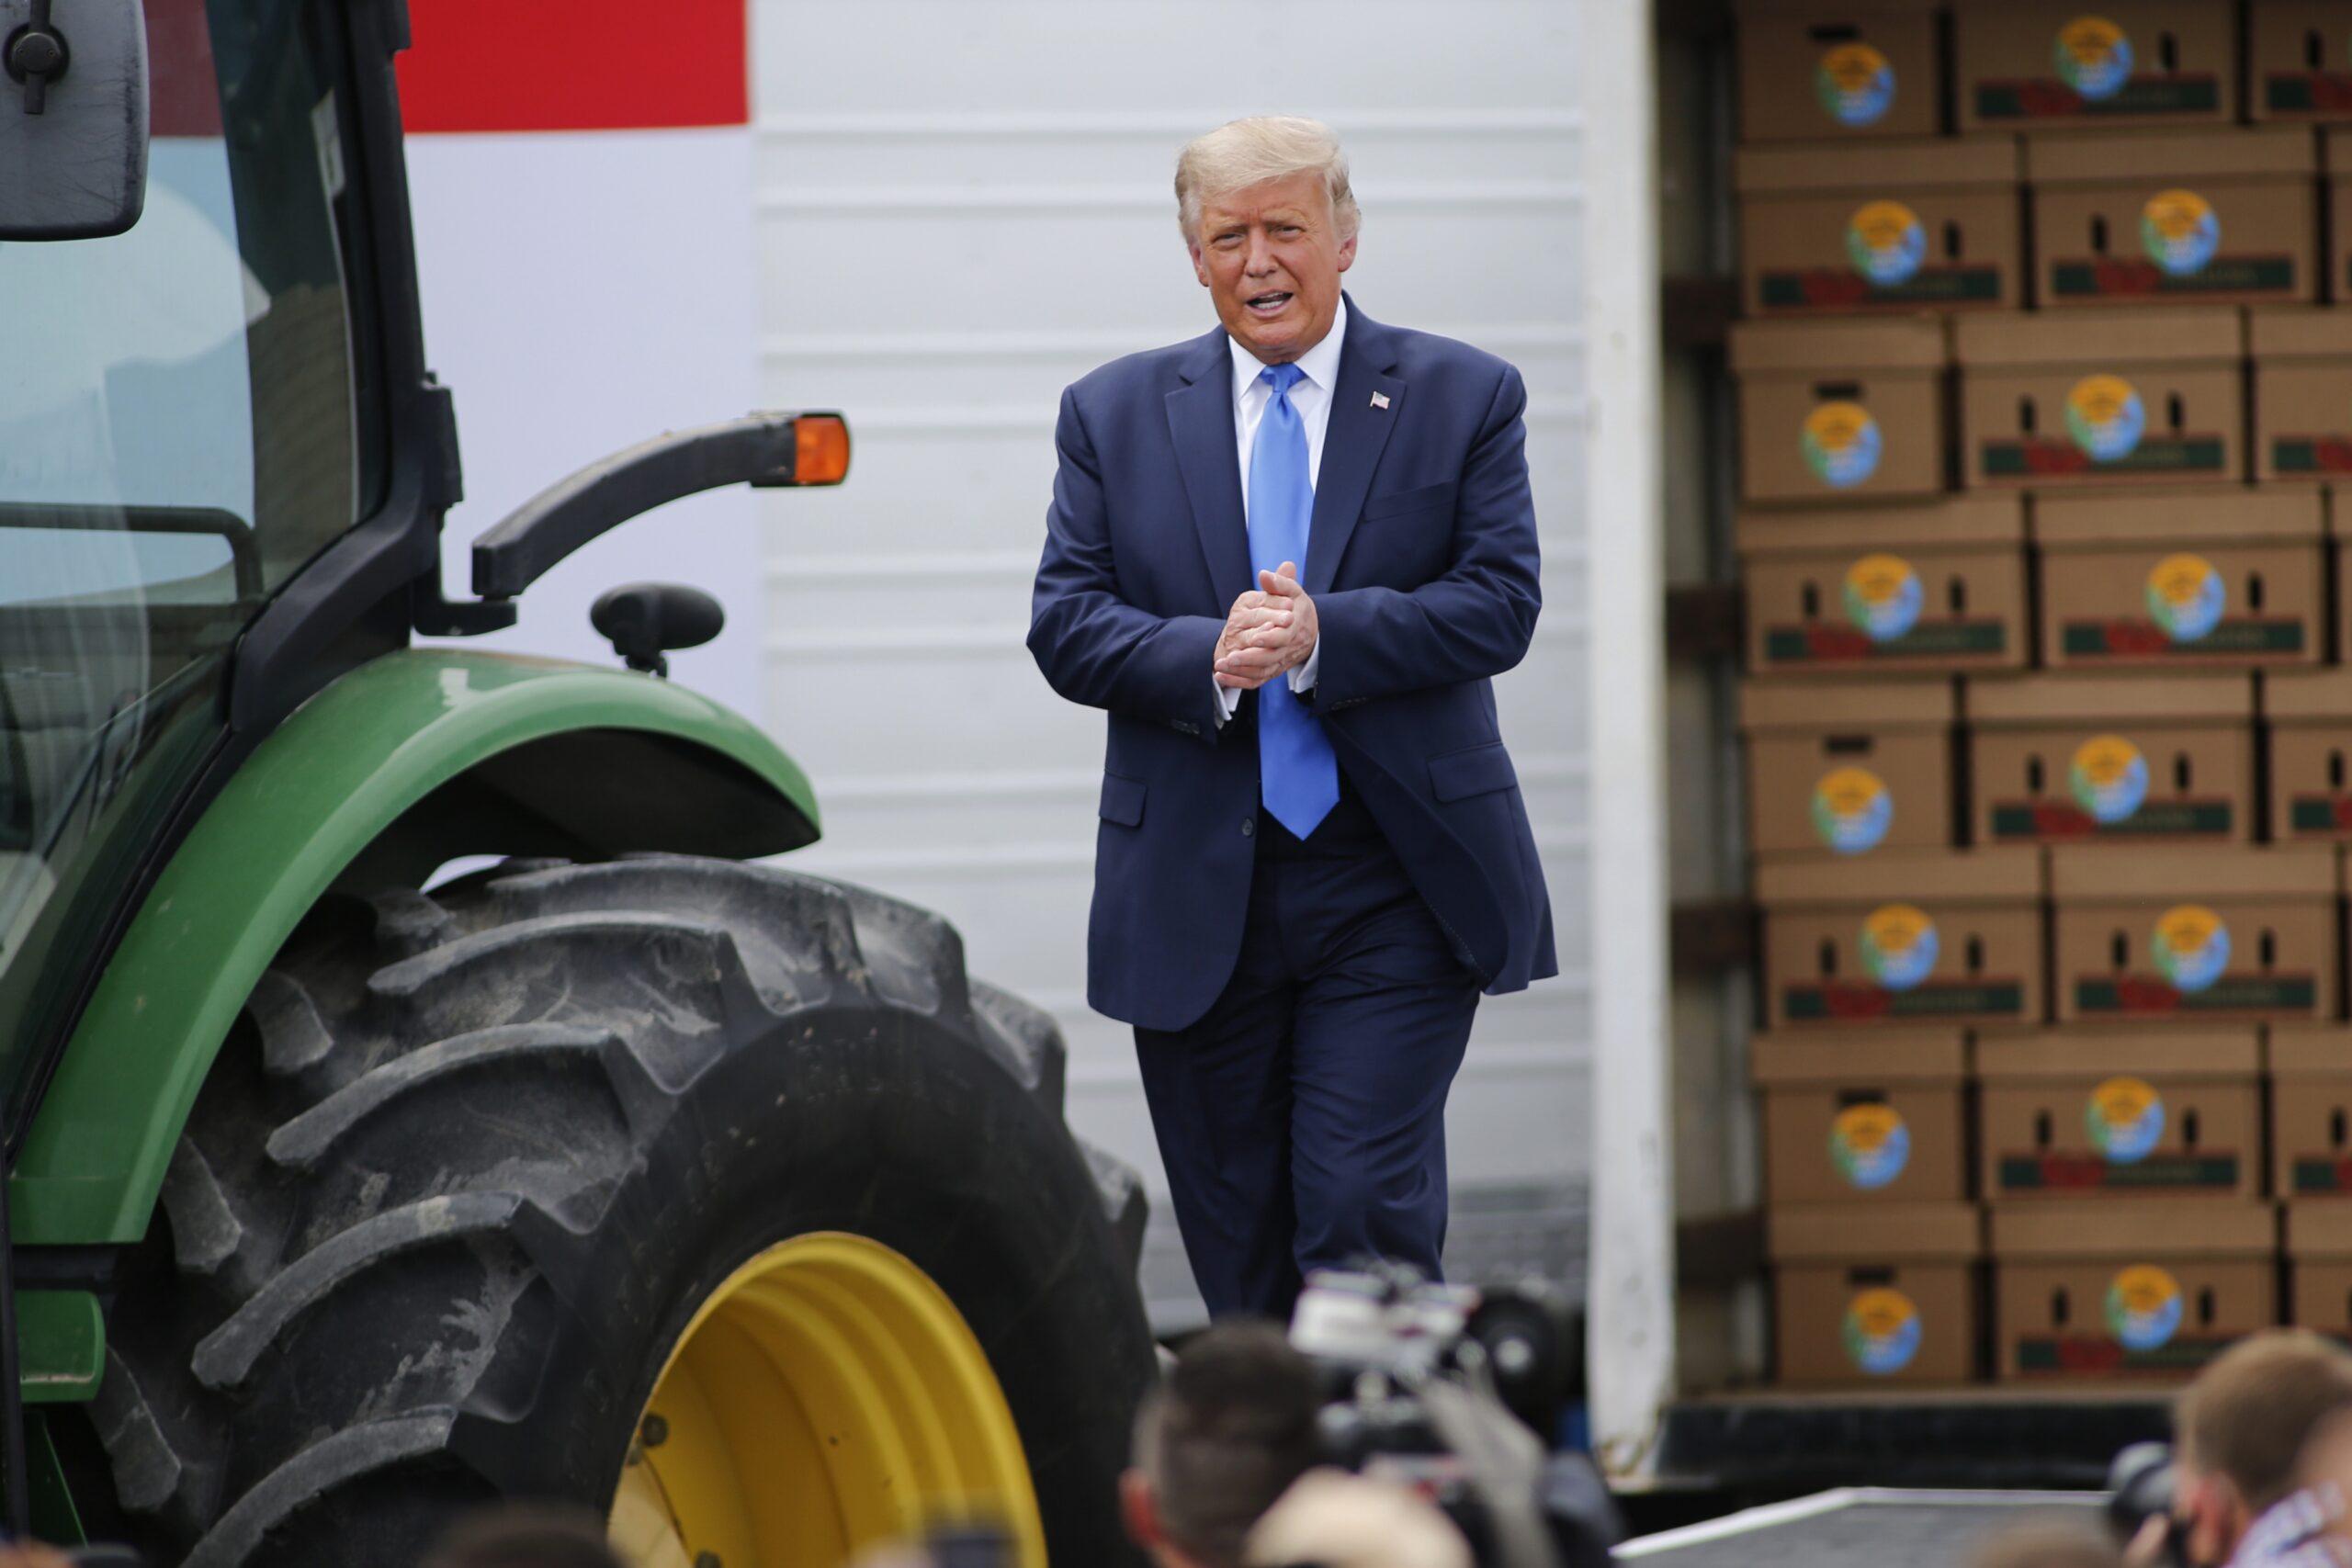 President Donald Trump arrives to deliver remarks on the Farmers to Families Food Box Program in North Carolina